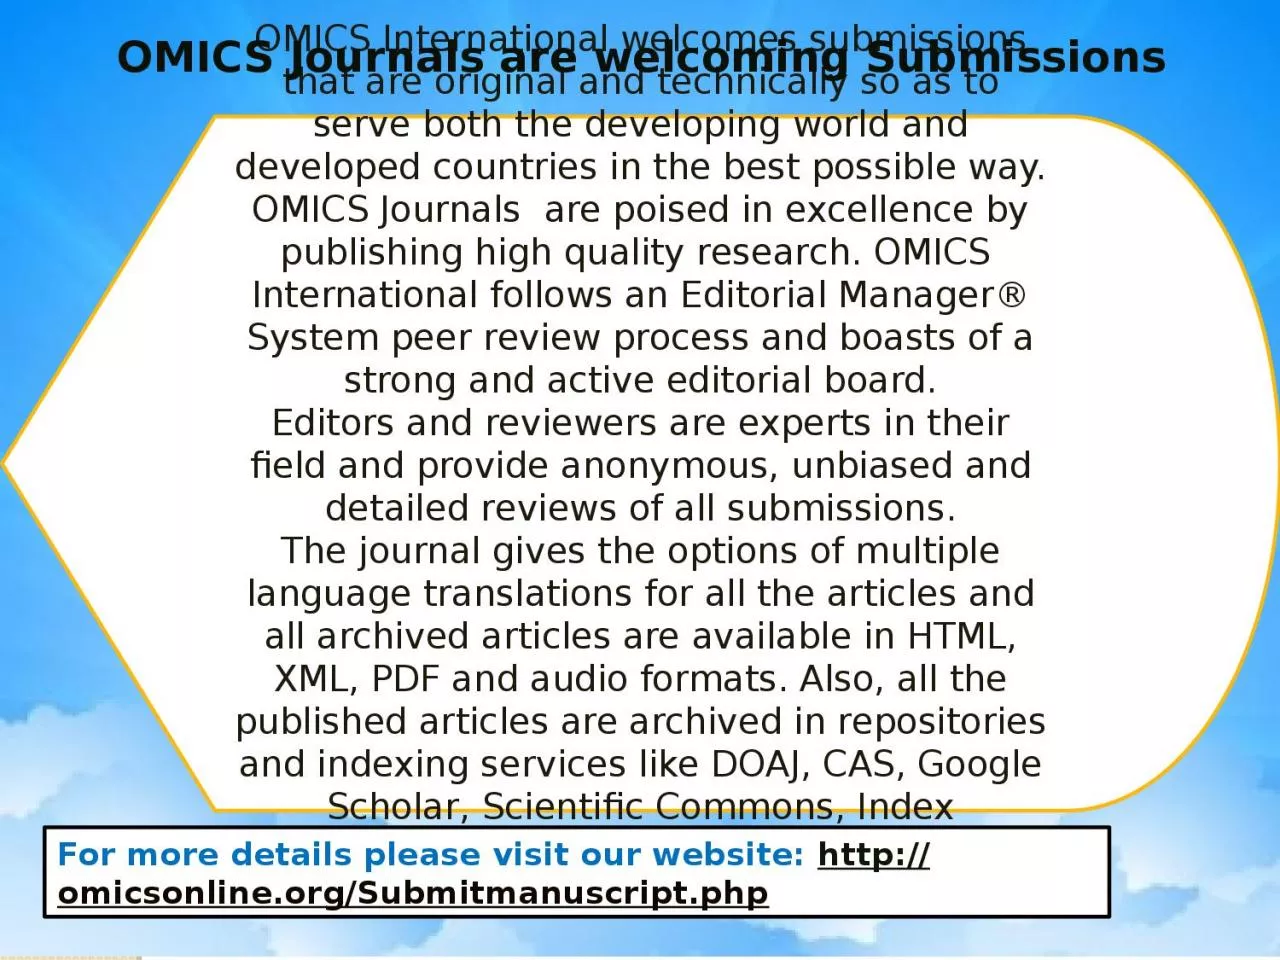 OMICS   International  welcomes submissions that are original and technically so as to